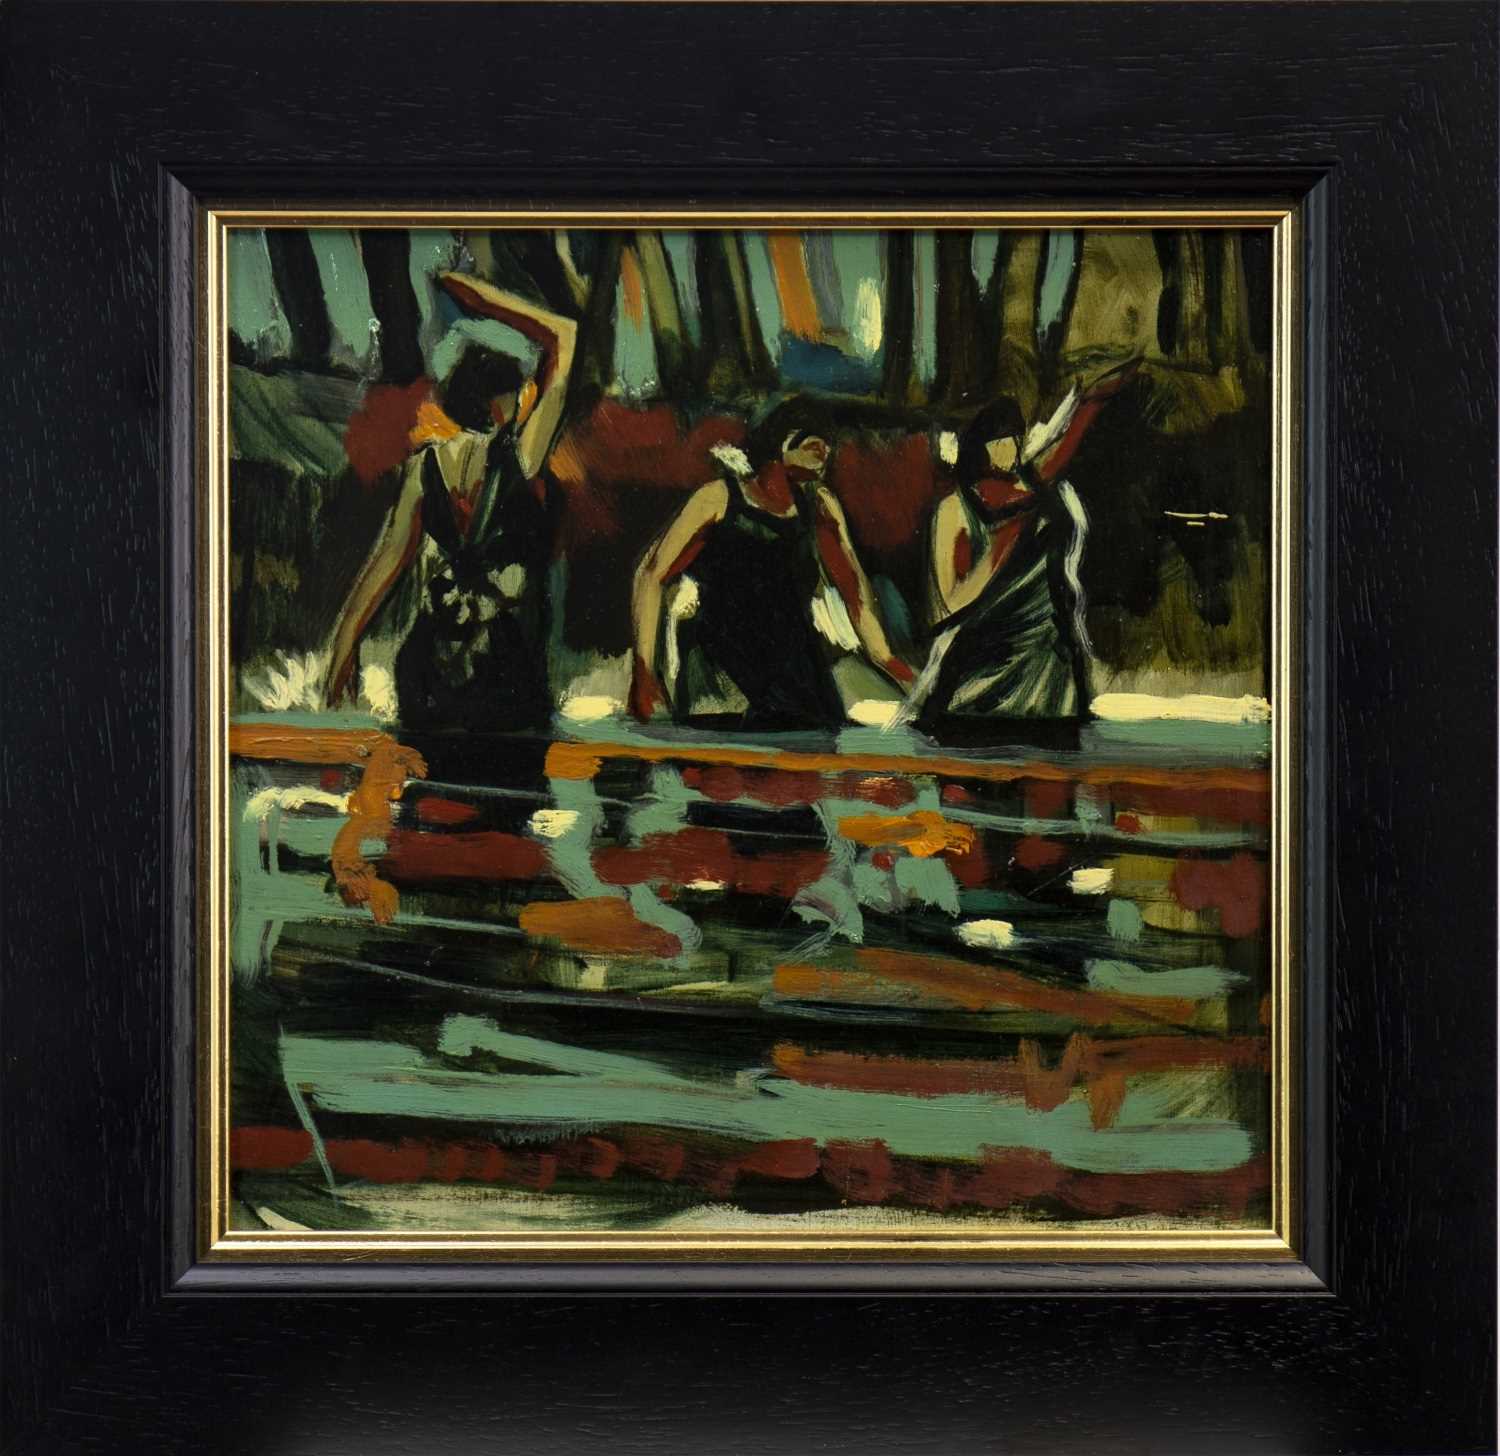 Lot 585 - DEEP IN THE FOREST, AN OIL BY JAMIE O'DEA